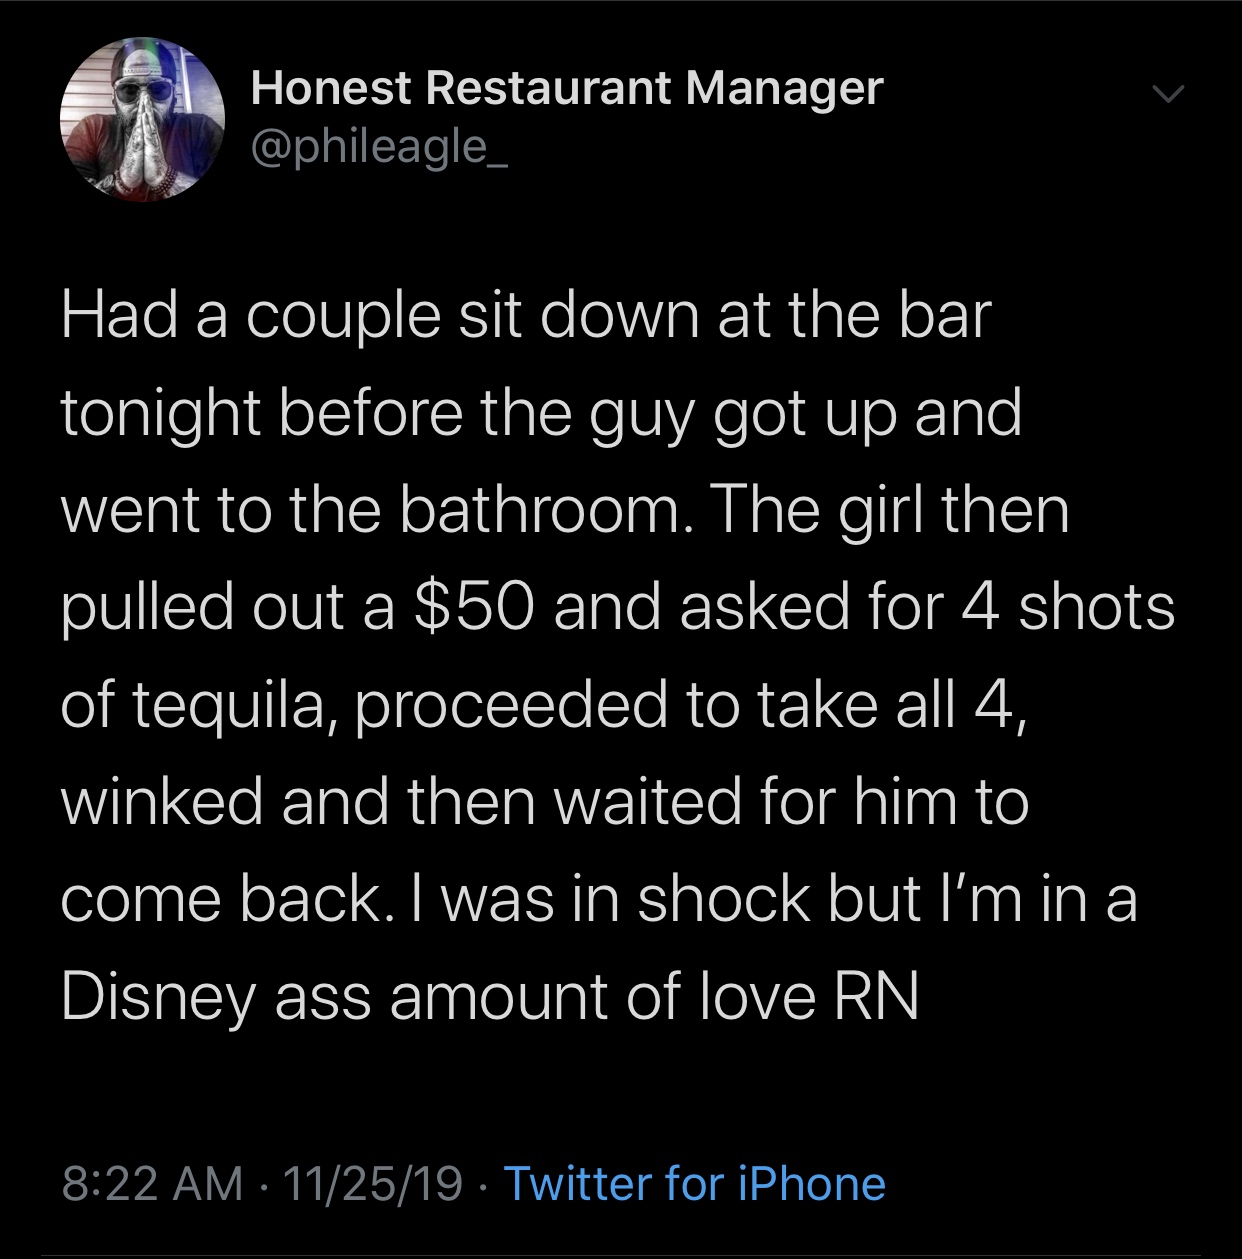 meme - atmosphere - Honest Restaurant Manager Had a couple sit down at the bar tonight before the guy got up and went to the bathroom. The girl then pulled out a $50 and asked for 4 shots of tequila, proceeded to take all 4, winked and then waited for him